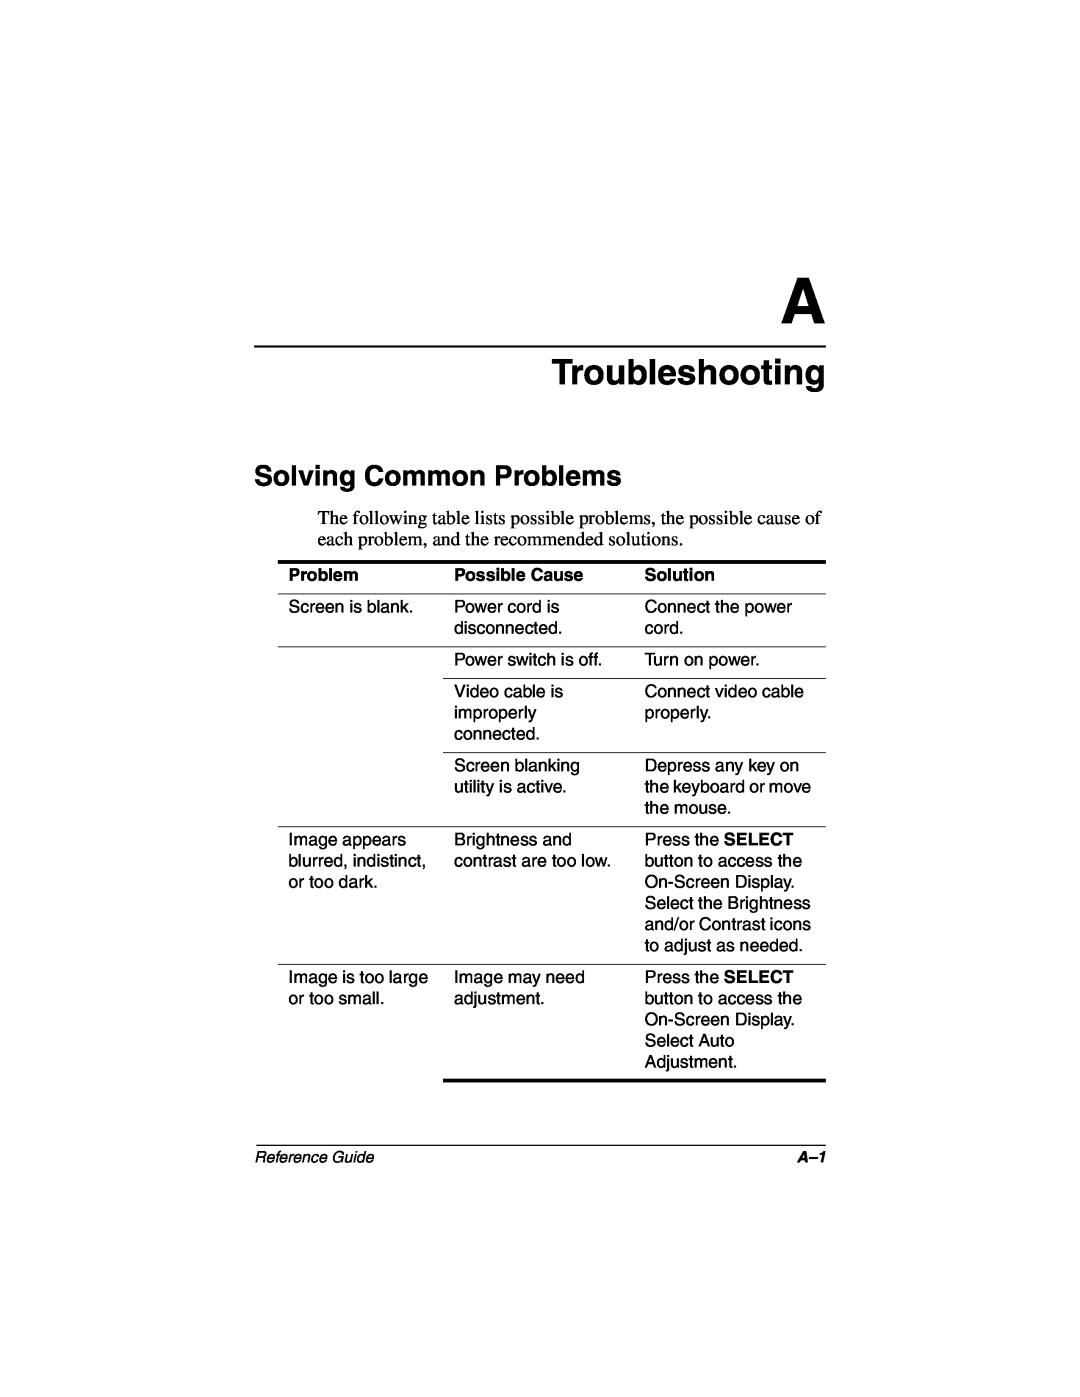 Compaq 5017 manual Troubleshooting, Solving Common Problems, Possible Cause, Solution 